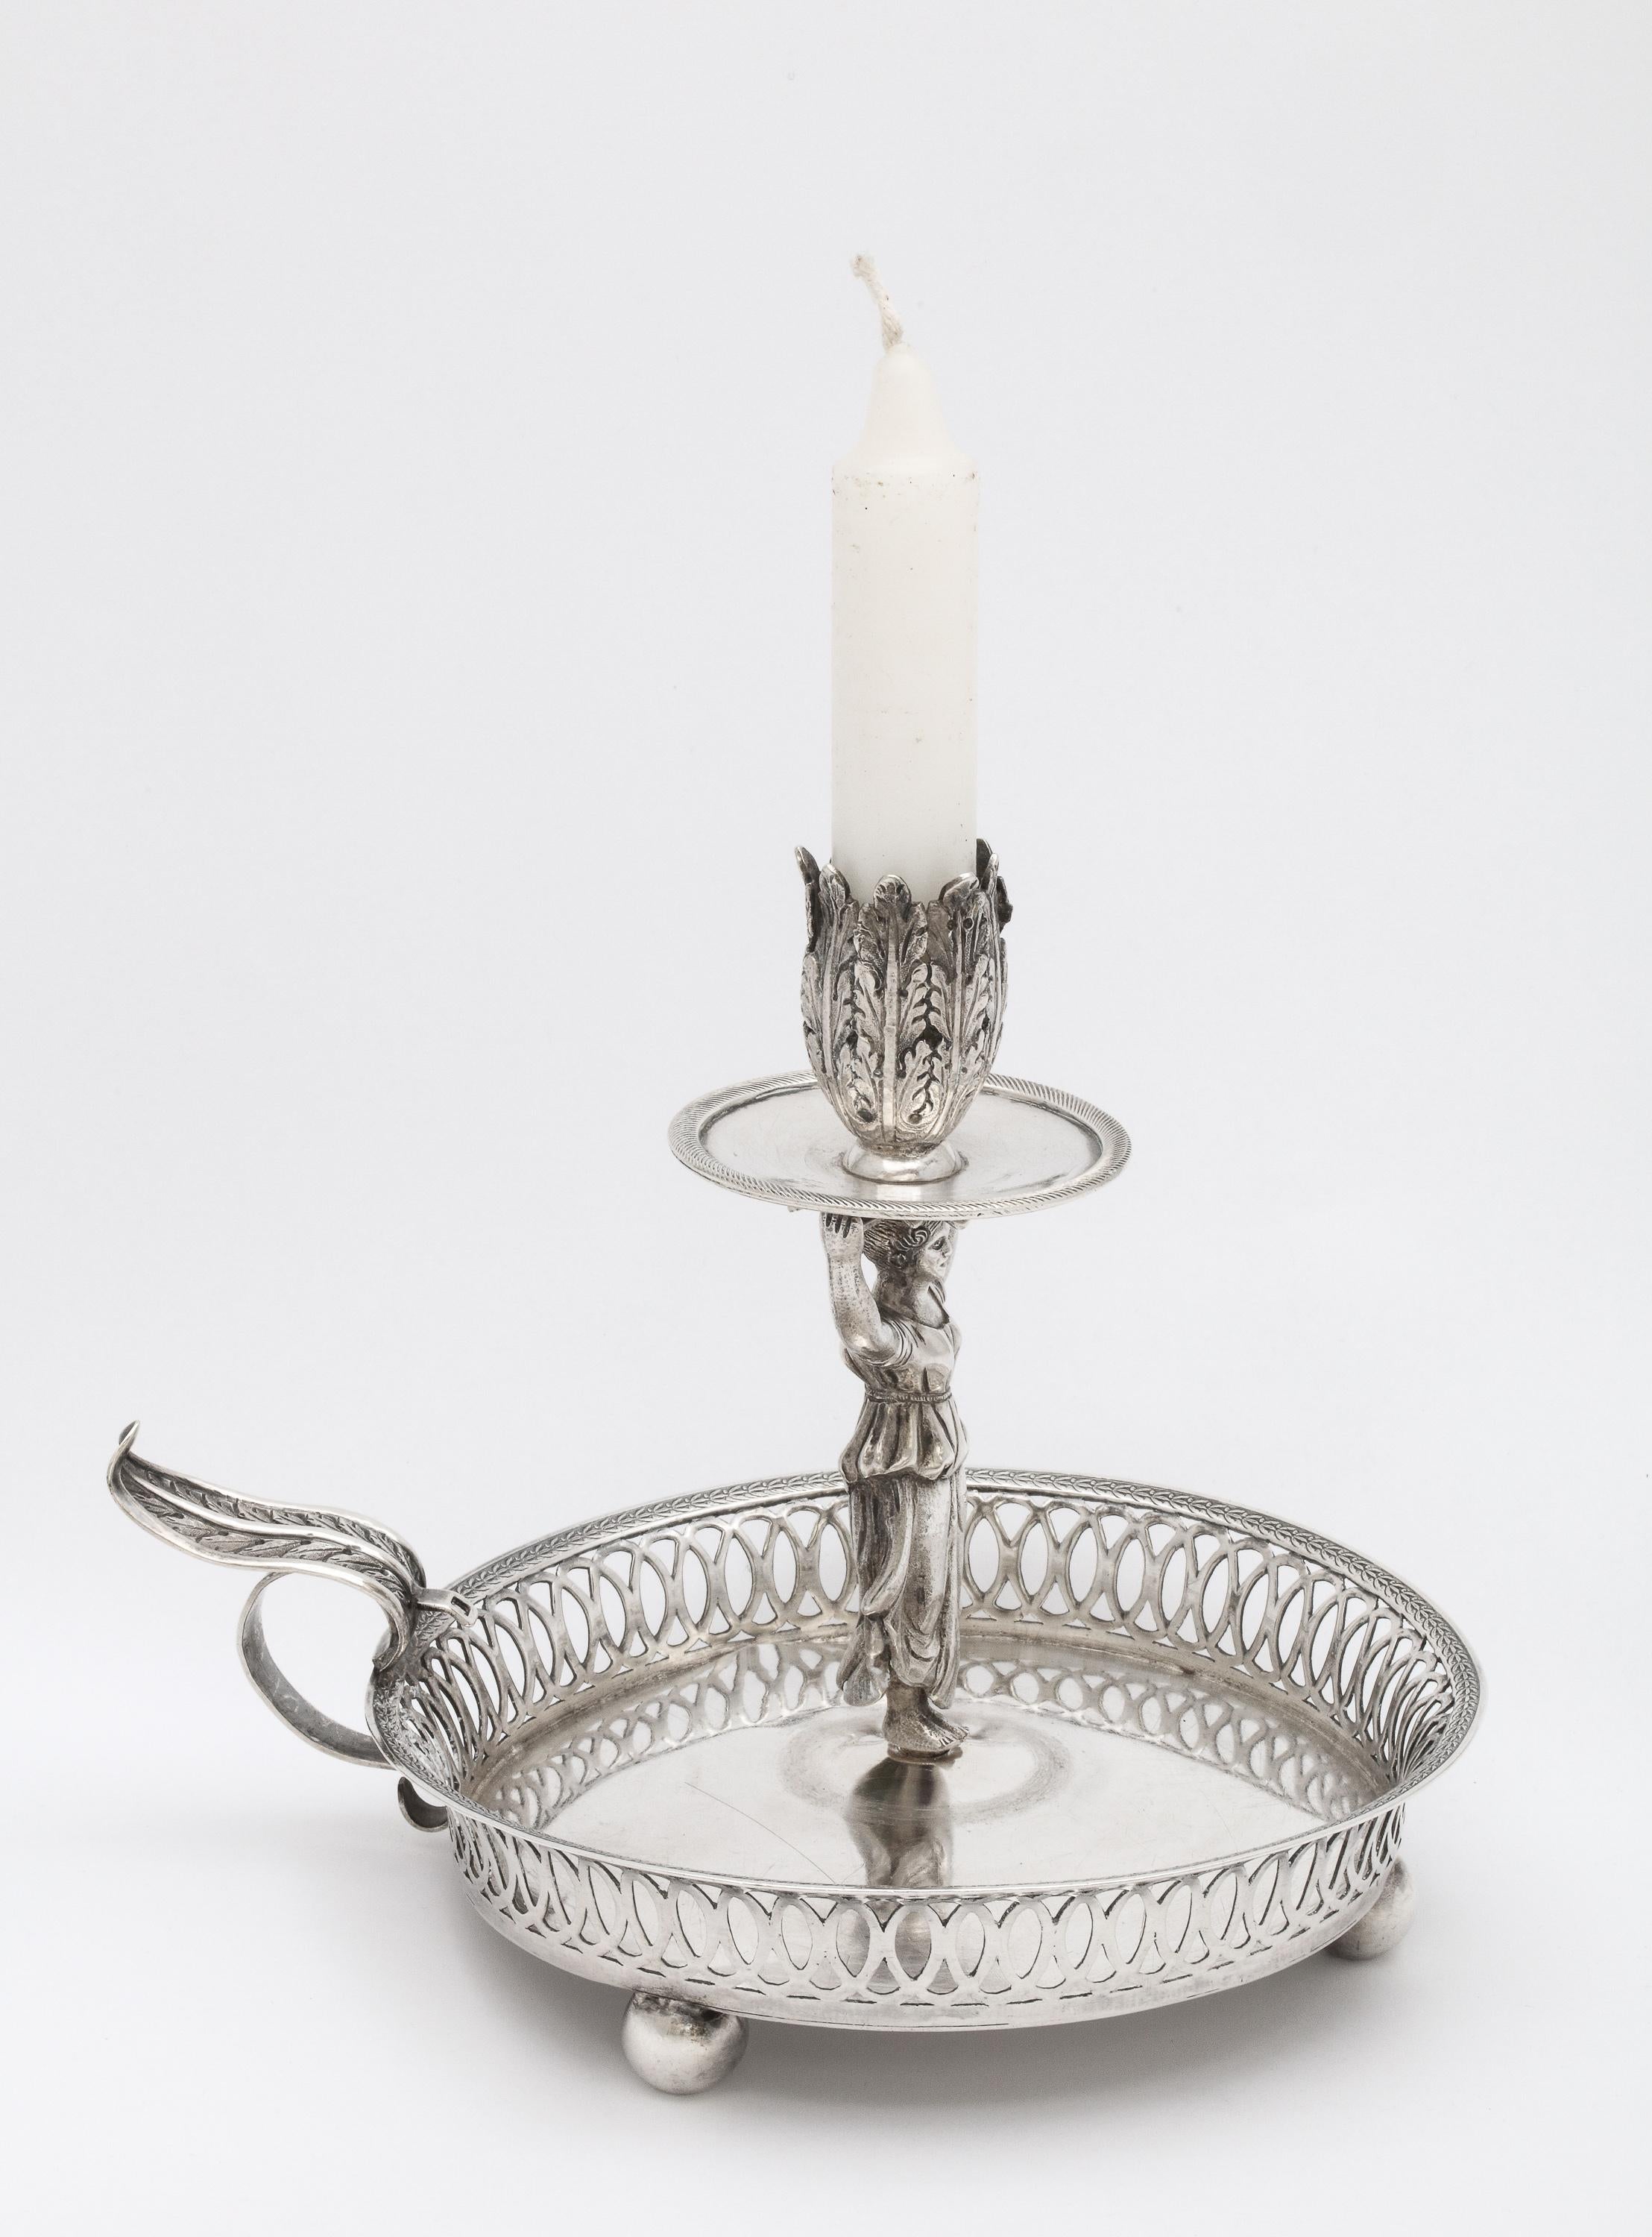 Victorian Period, sterling silver chamber stick on ball feet, Seville, Spain, year hallmarked for 1862, Manuel Maria Paulino - maker. Measures 6 1/2 inches high (at highest point) x 5 1/2 inches diameter across base. Width, from leaf-form handle to